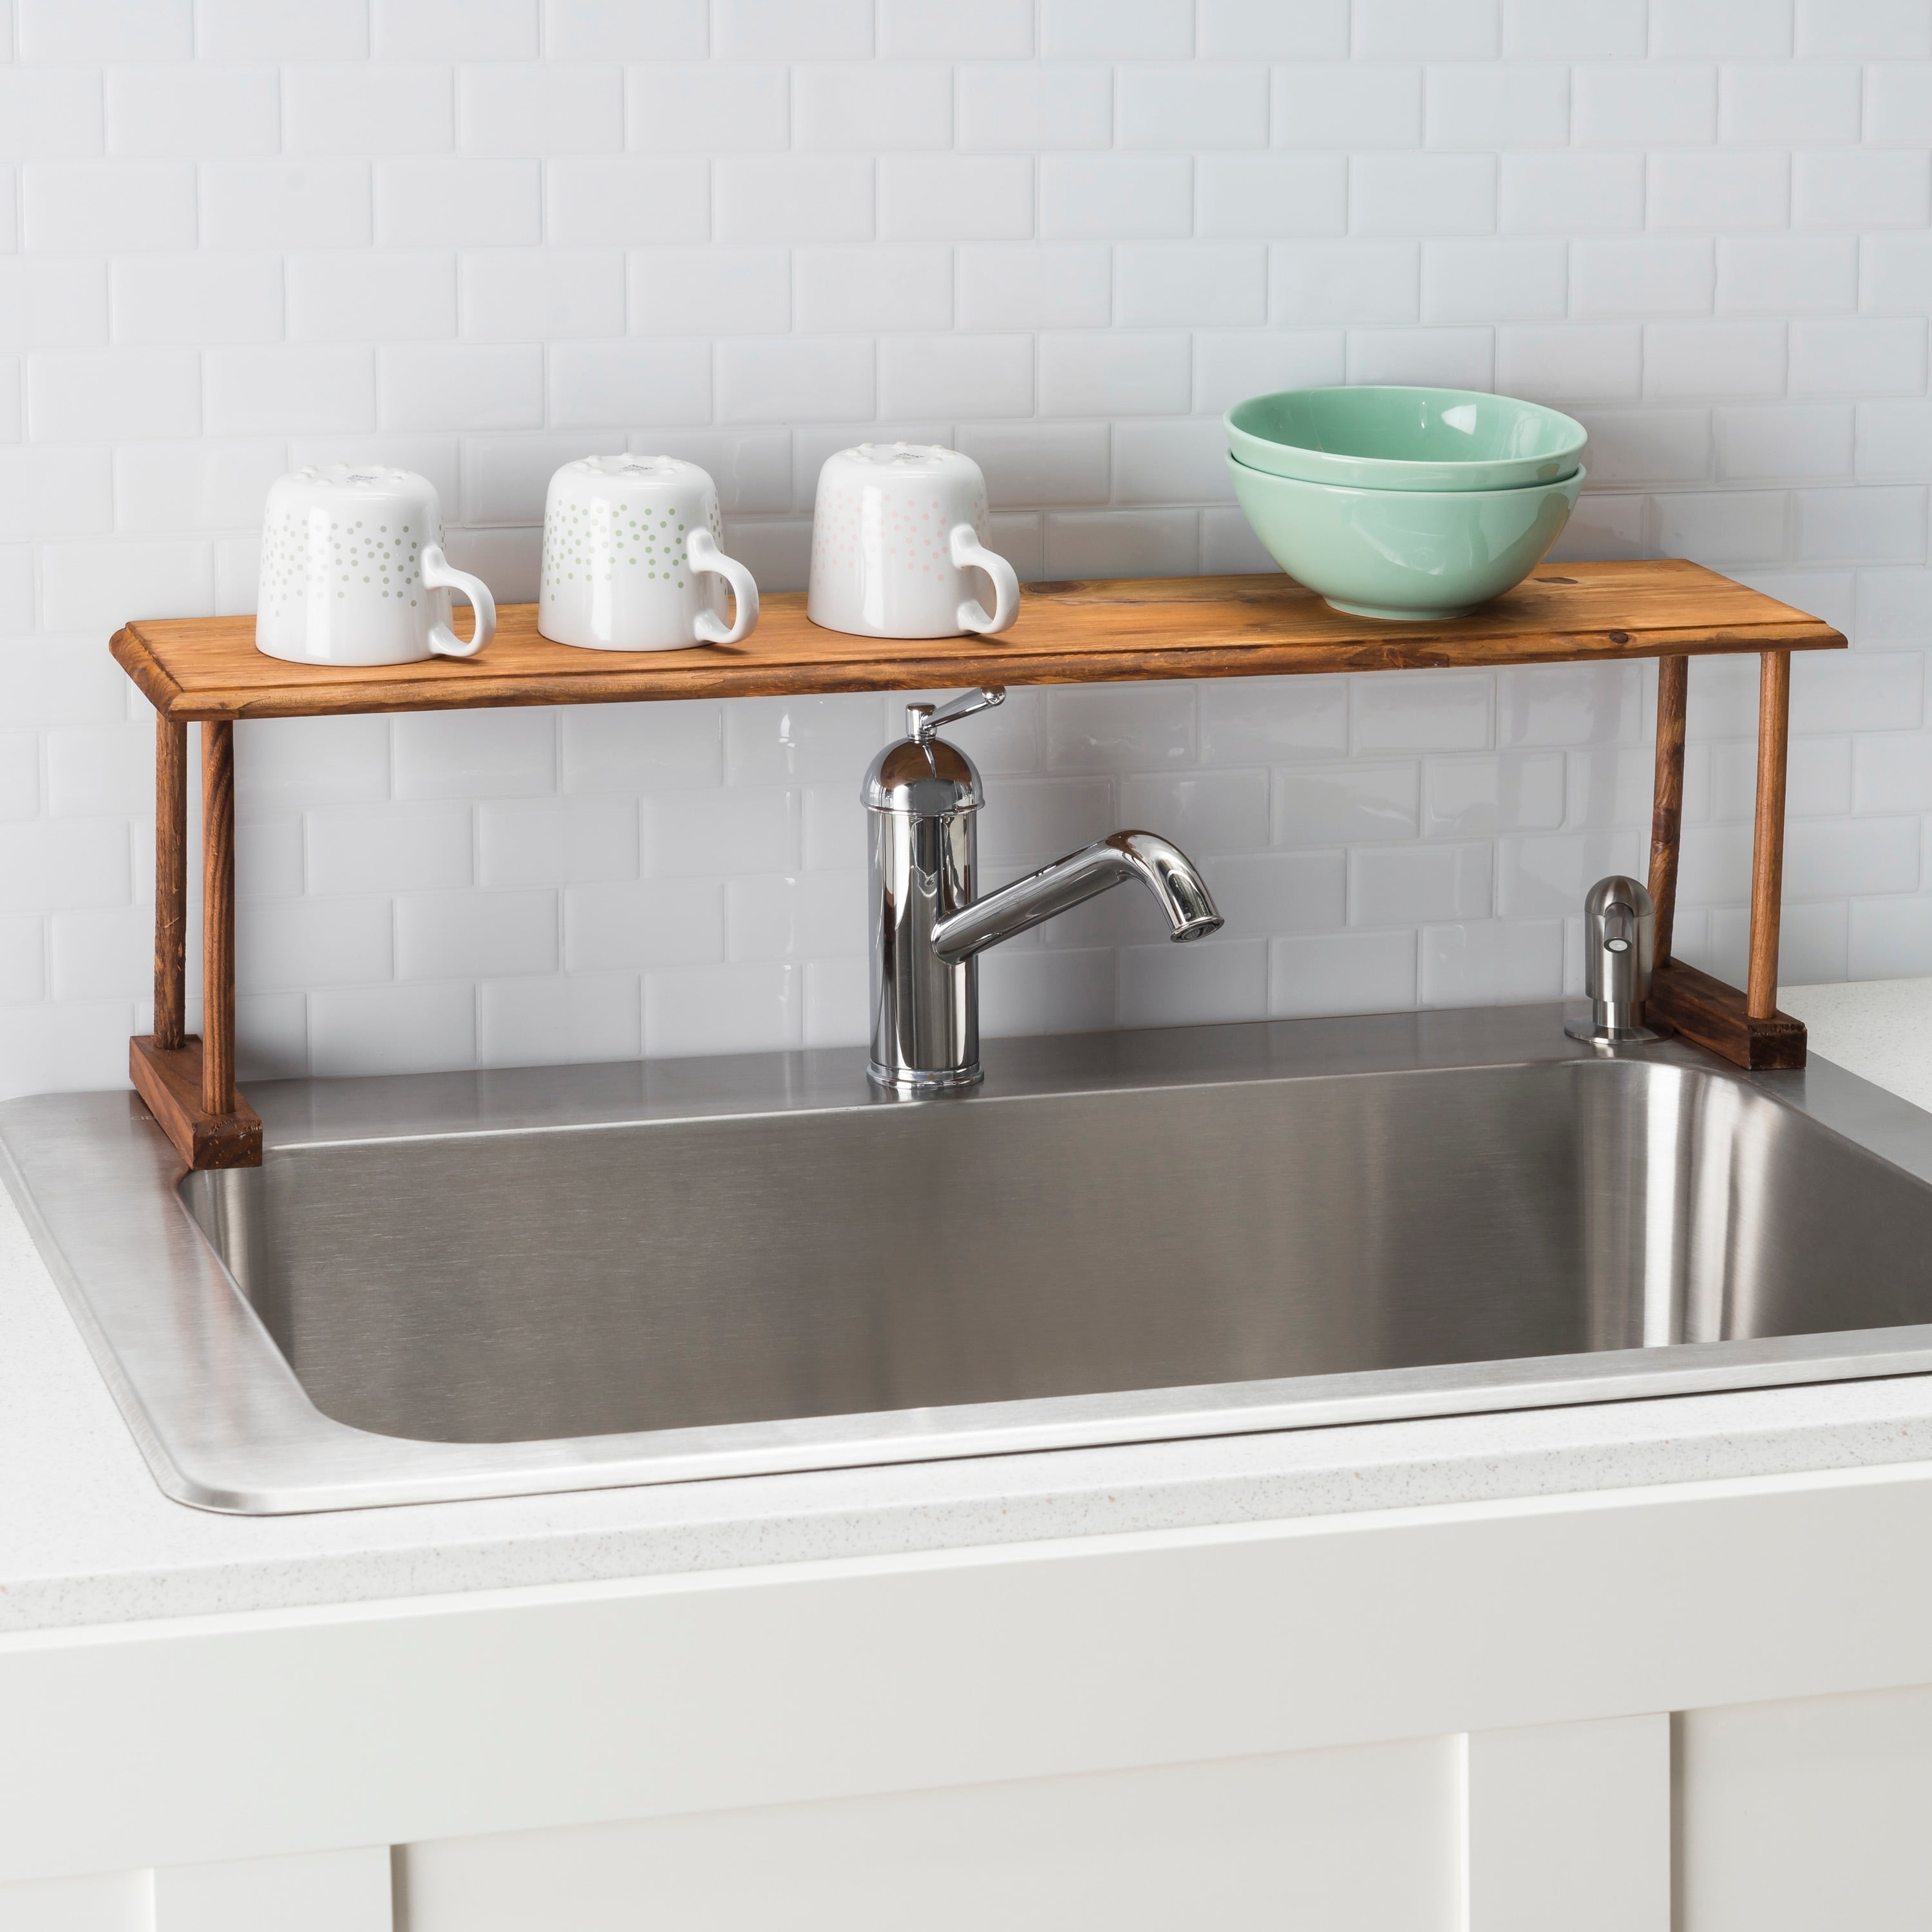  Home Basics Over Sink Shelf, (Chrome) Steel Over The Kitchen Sink  Organizer for Soap, Sponges, Scrubbers, and More